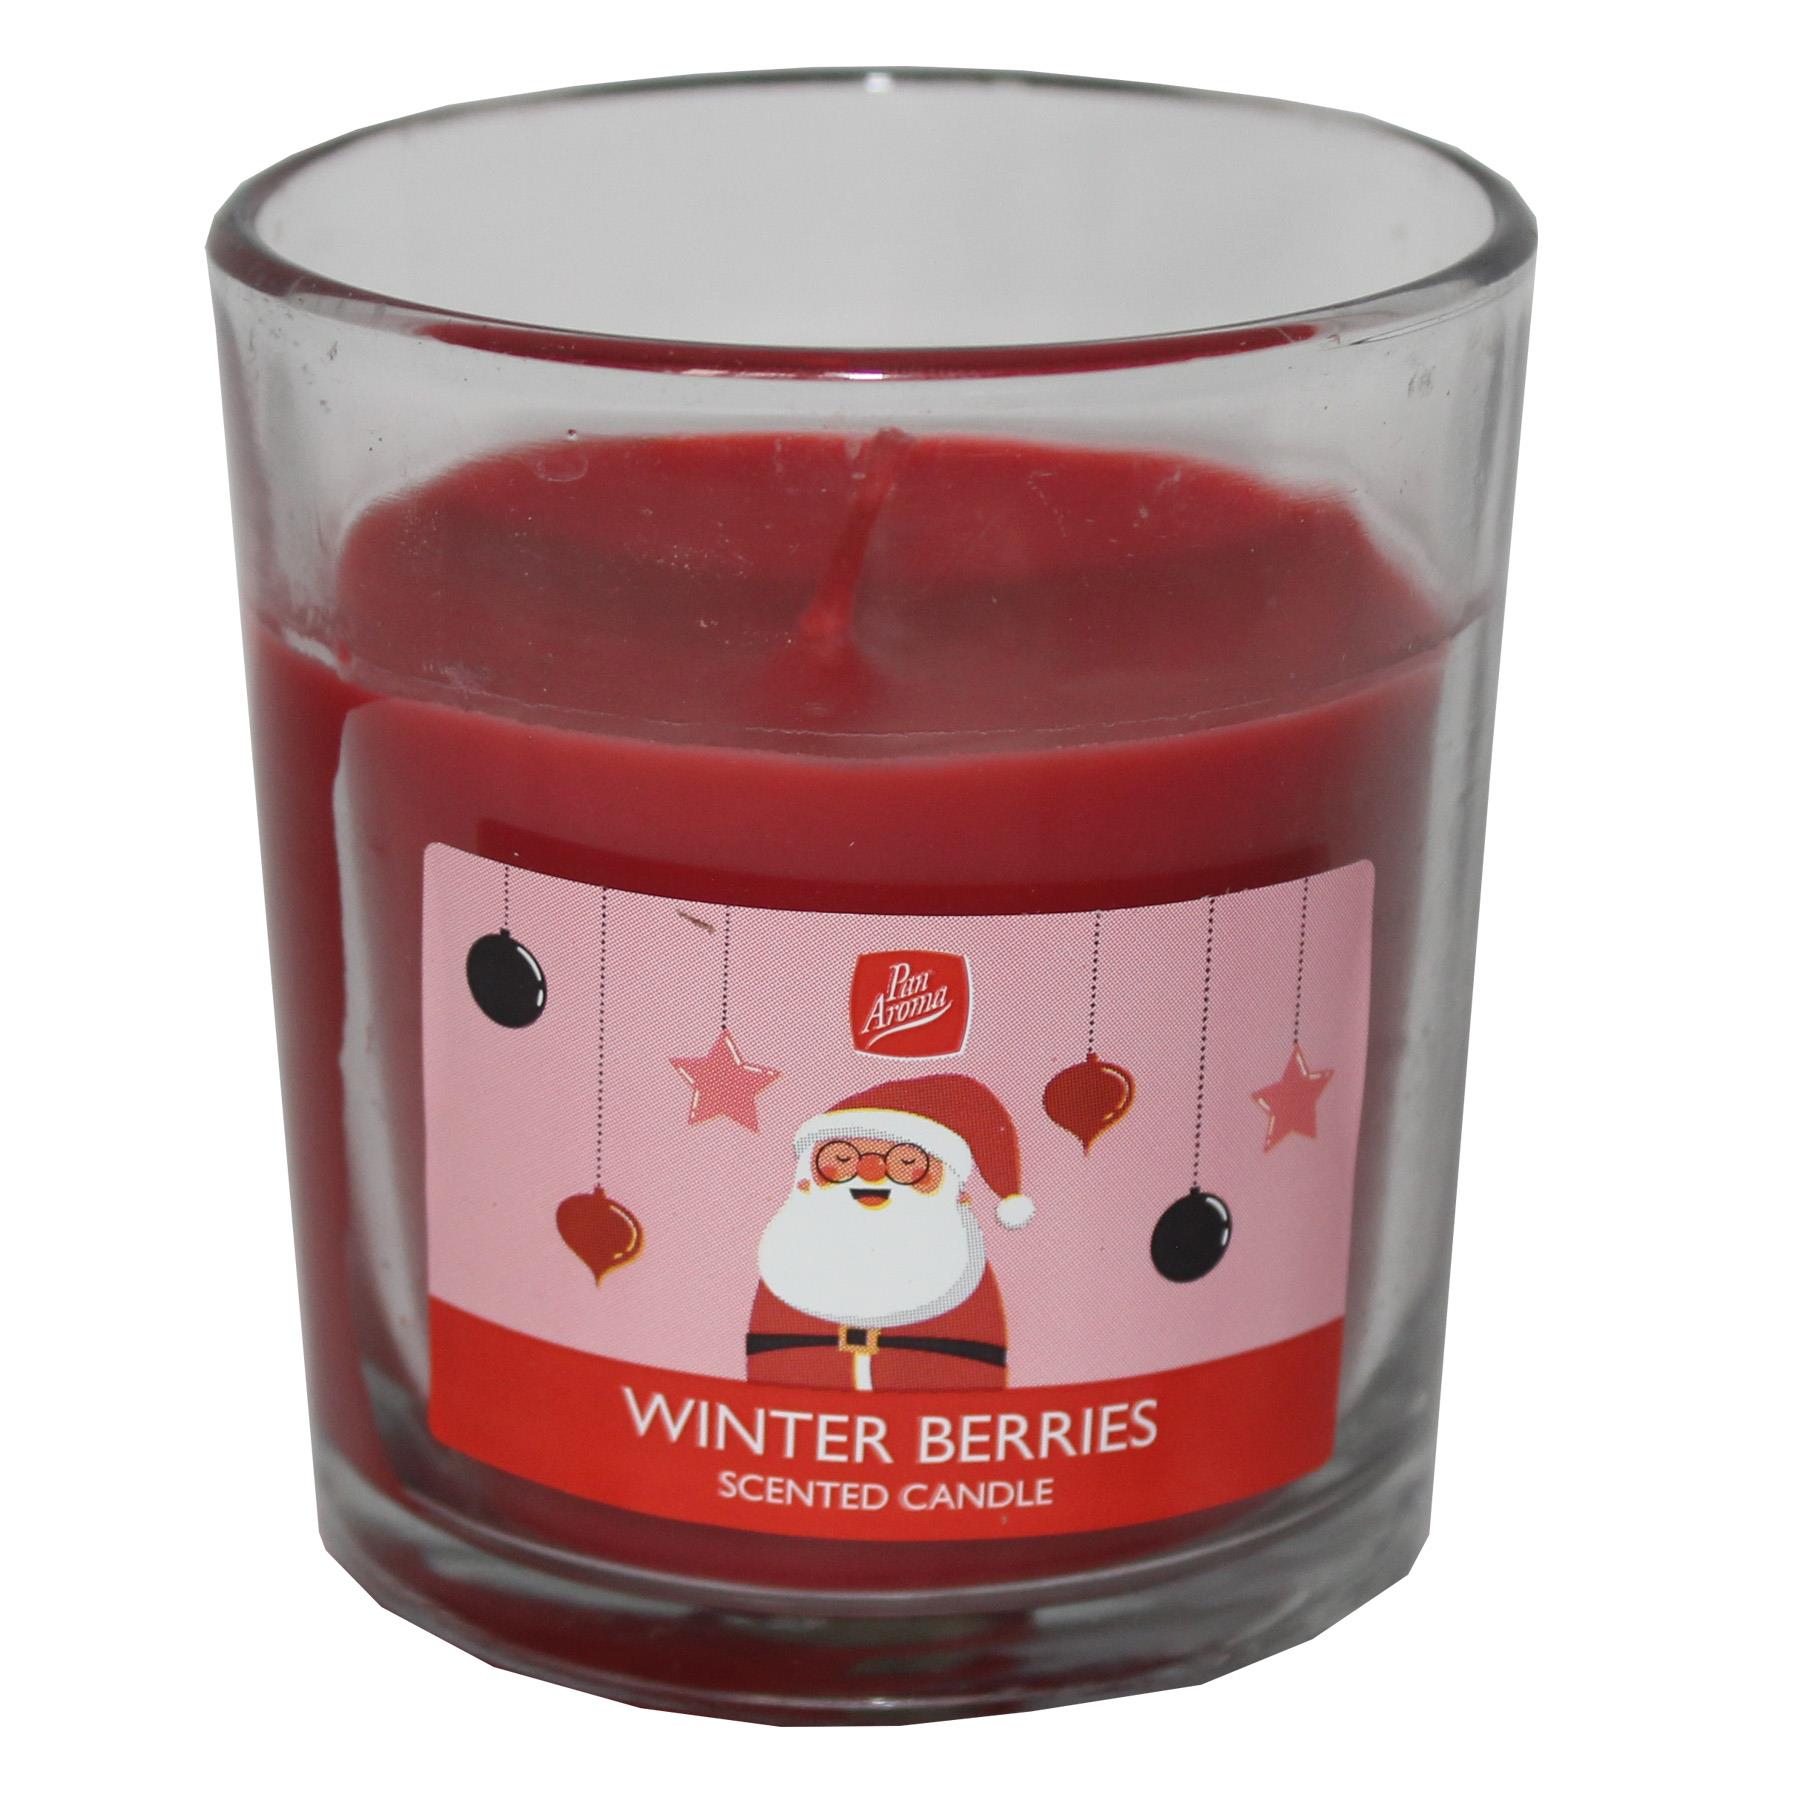 Christmas Scented Candle in Glass Jar Pan Aroma Winter Berries